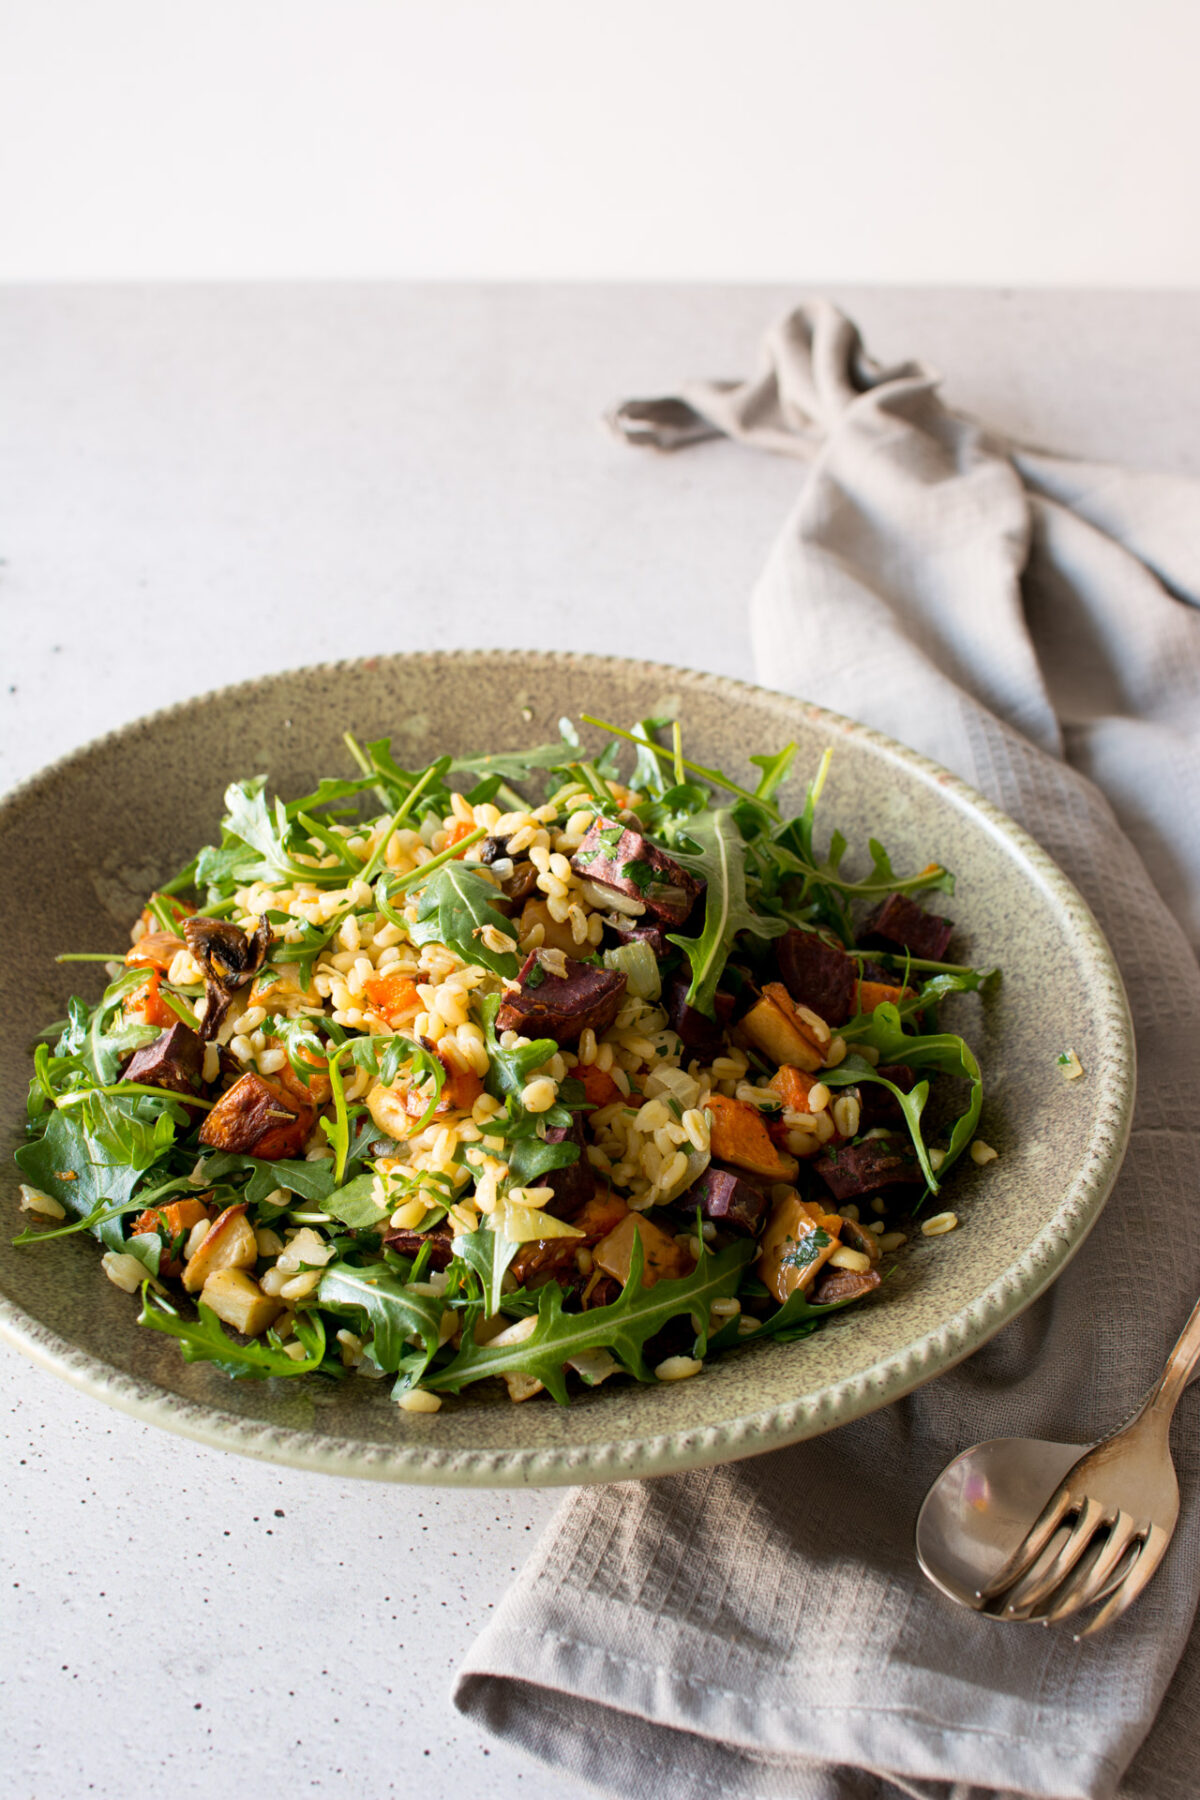 A warming, vegan Winter salad, full of healthy root vegetables and wheat berries. You won't want to miss this one!